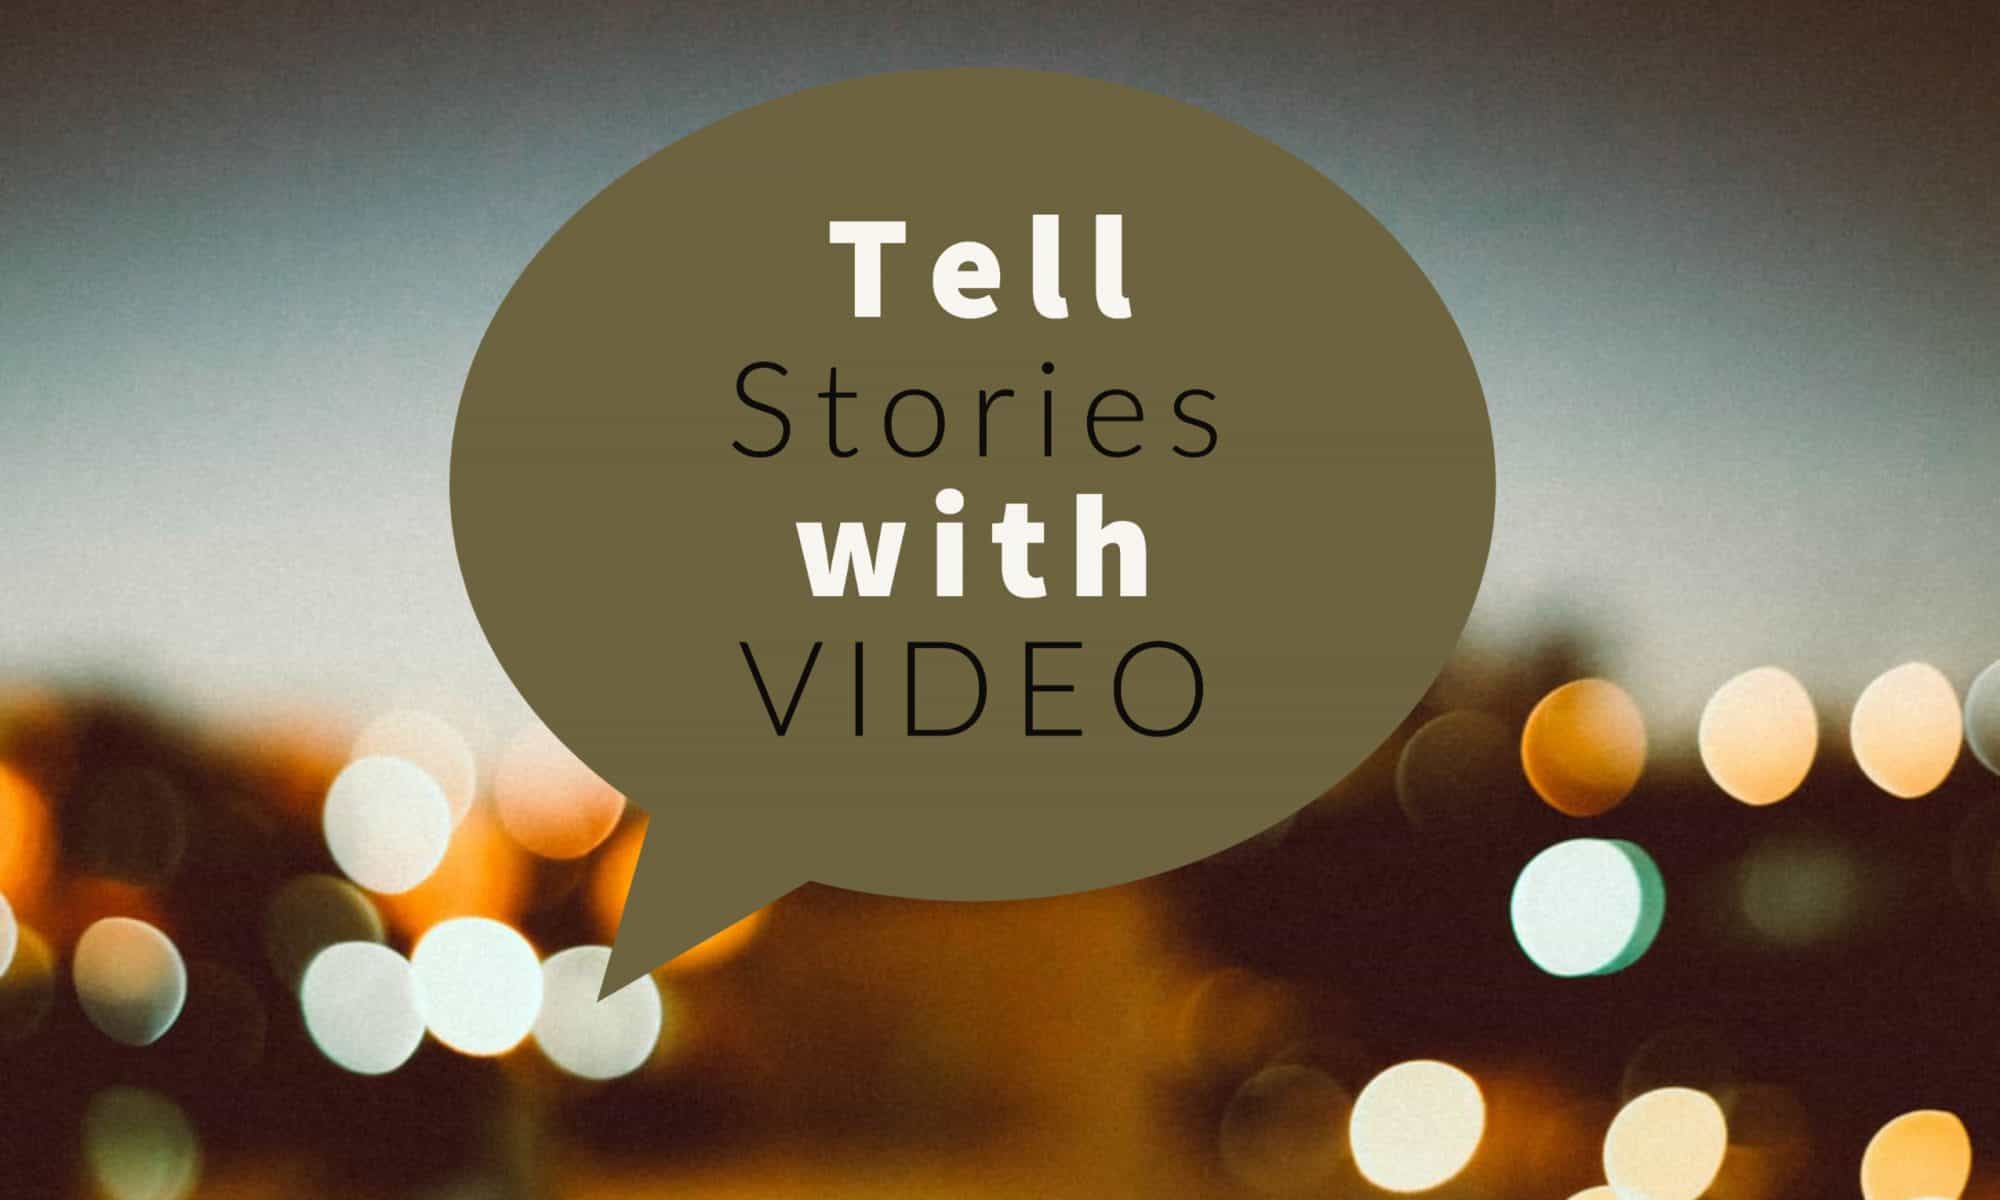 Tell stories with video